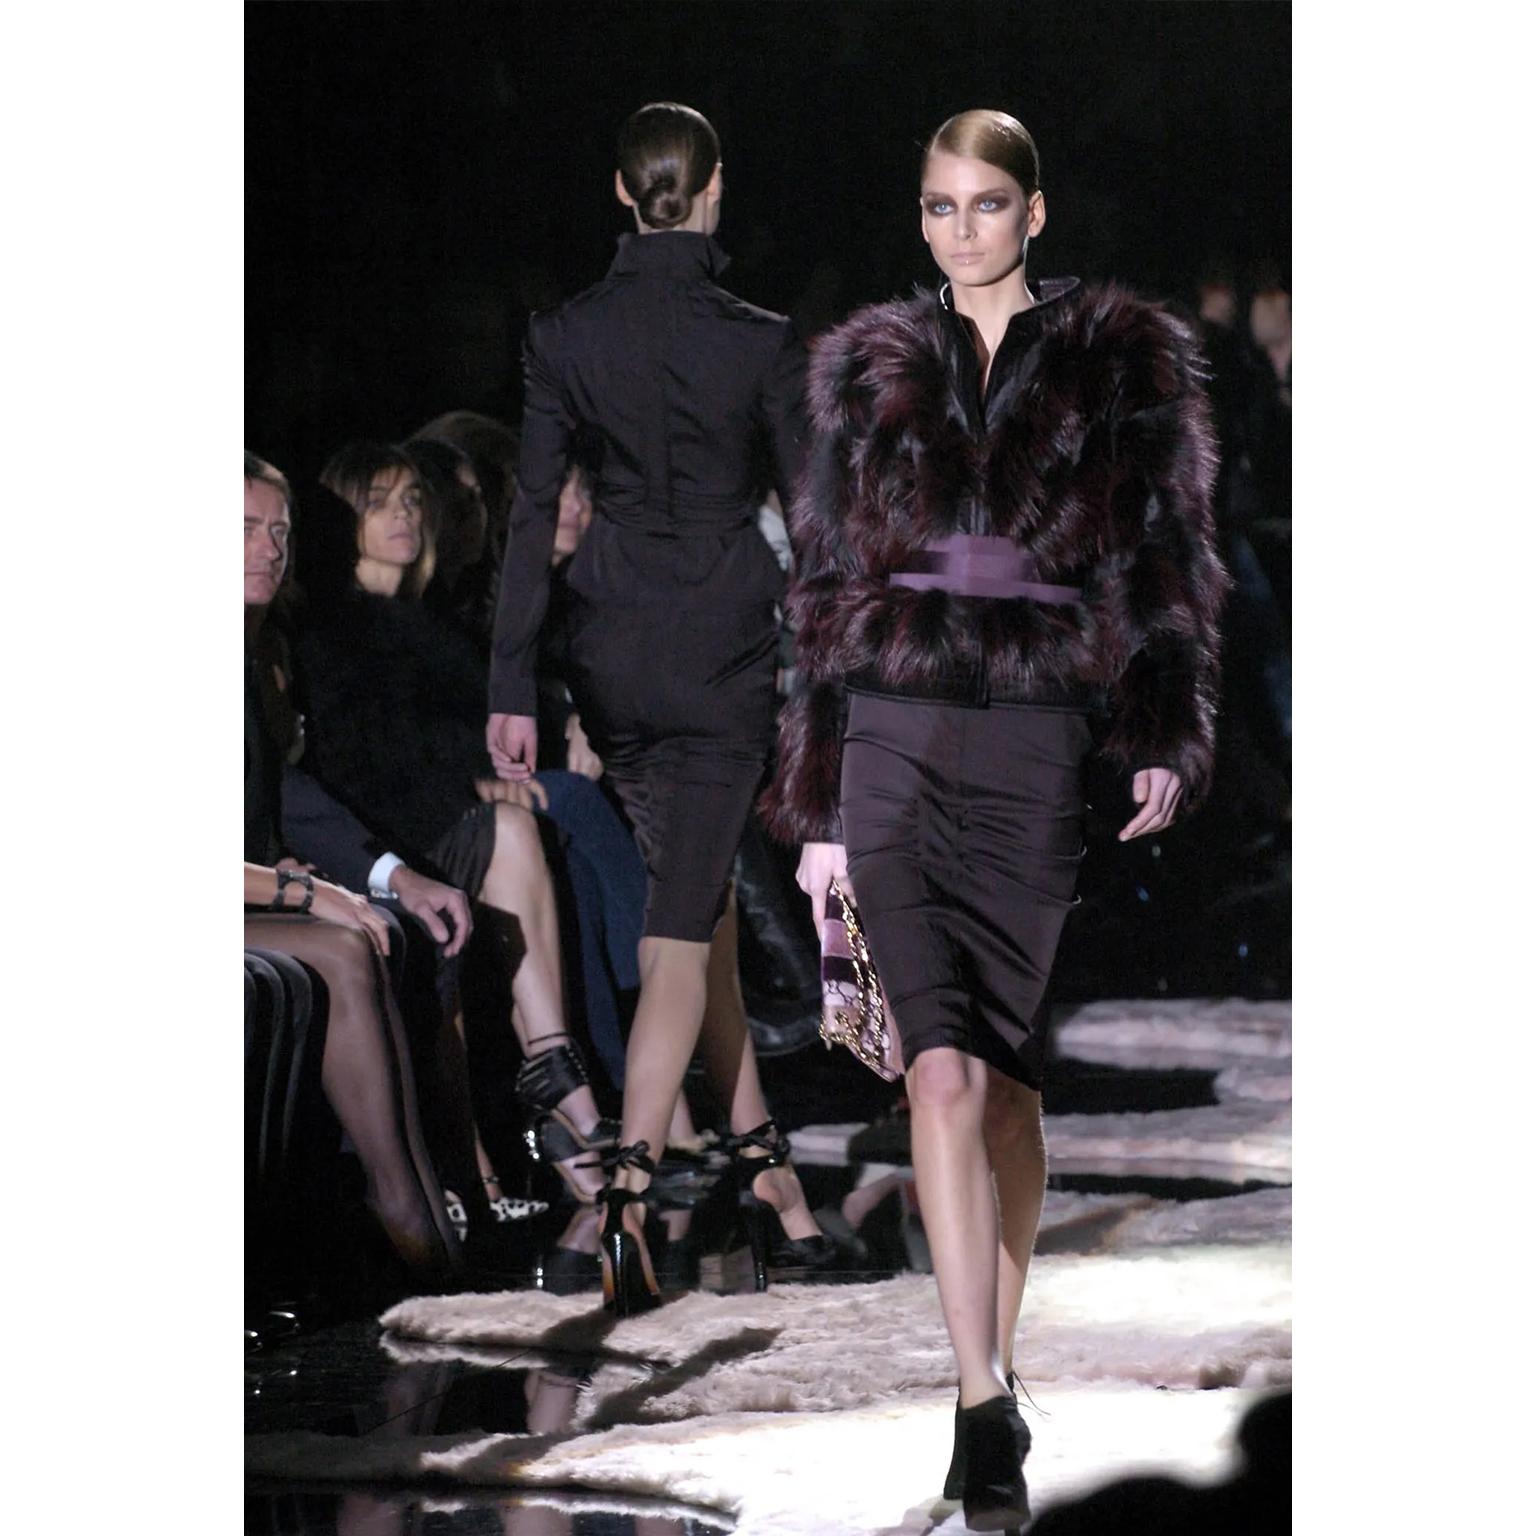 This is a stunning deadstock Tom Ford for Gucci Fall Winter 2004 dark plum brown pencil skirt with a band in back that hugs the body near the hemline. The skirt is unlined and has a fair amount of stretch. Skirts like these from the early 2000's